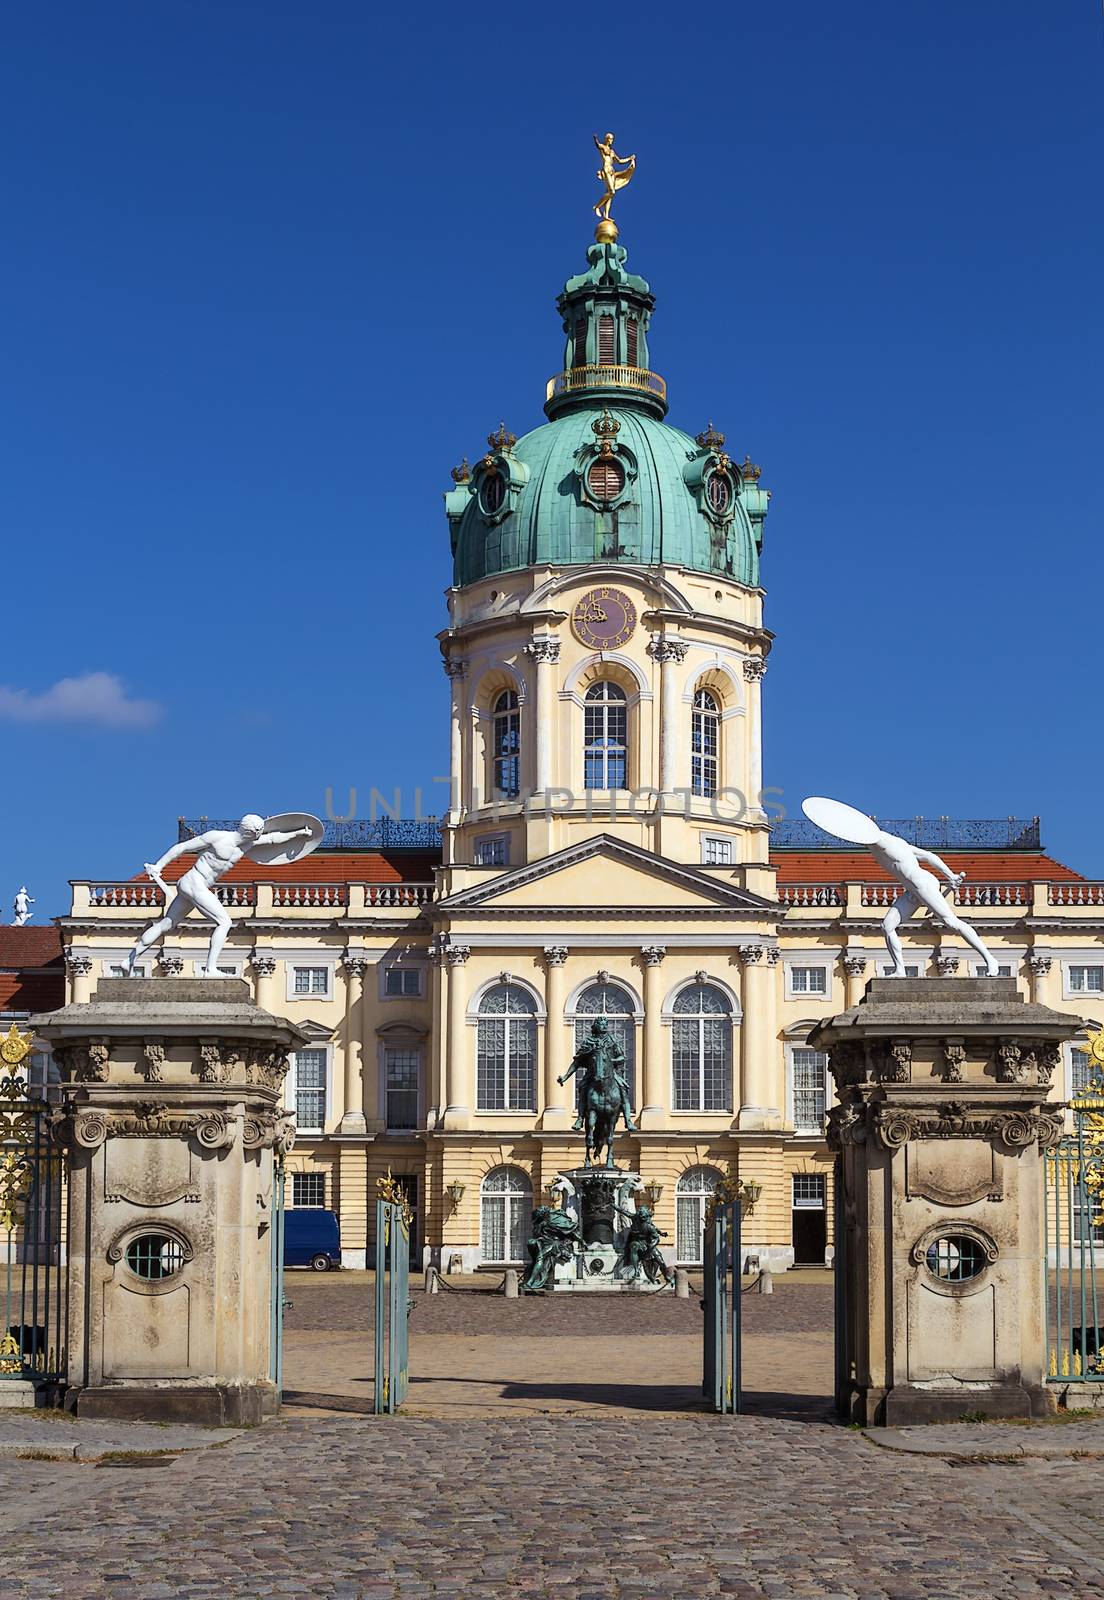 Charlottenburg Palace is the largest palace in Berlin and the only surviving royal residence in the city